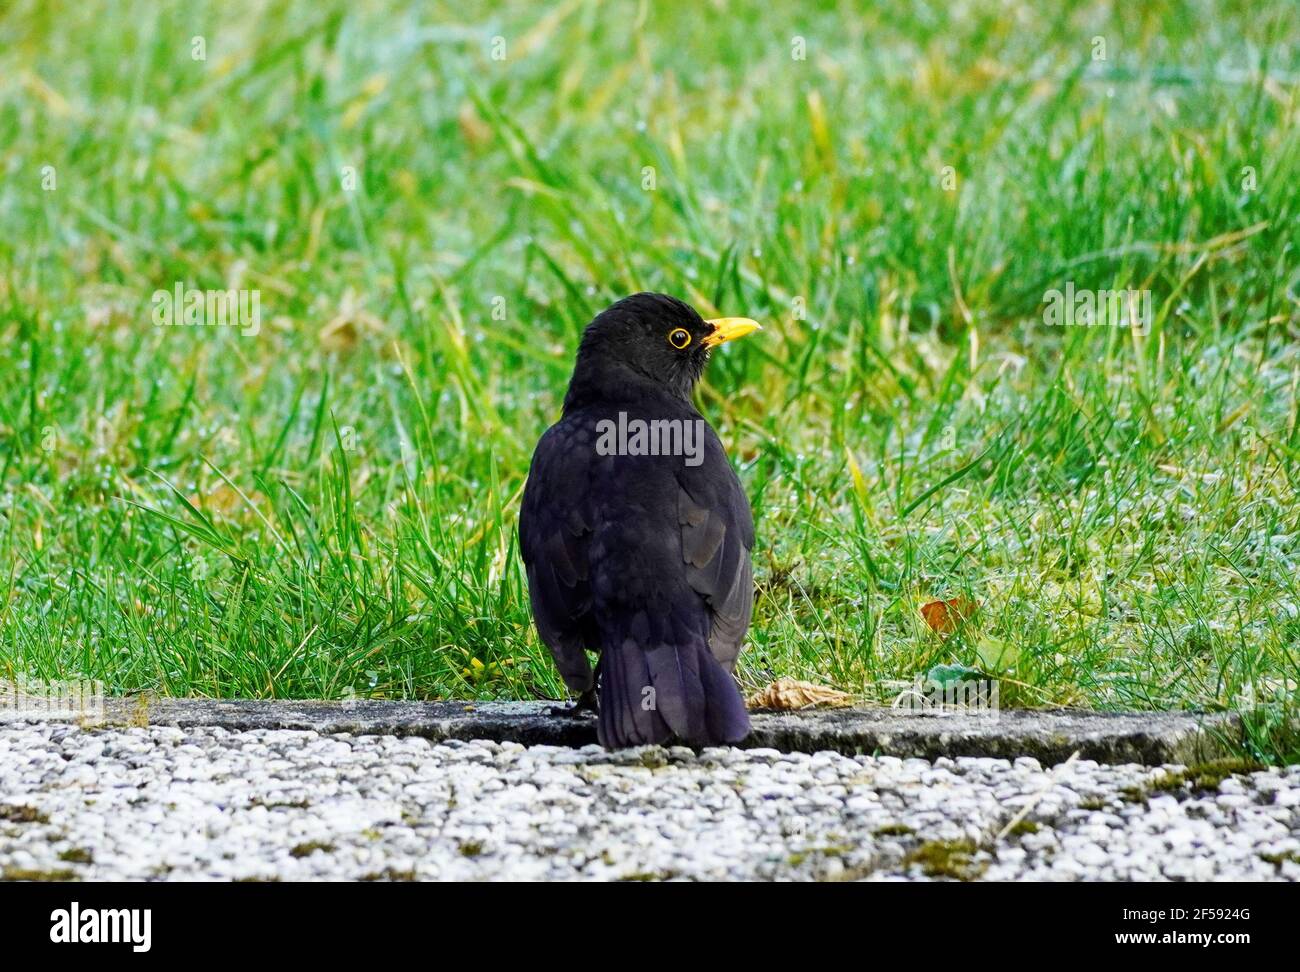 Blackbird with black plumage and yellow beak. Songbirds in winter in Germany Stock Photo